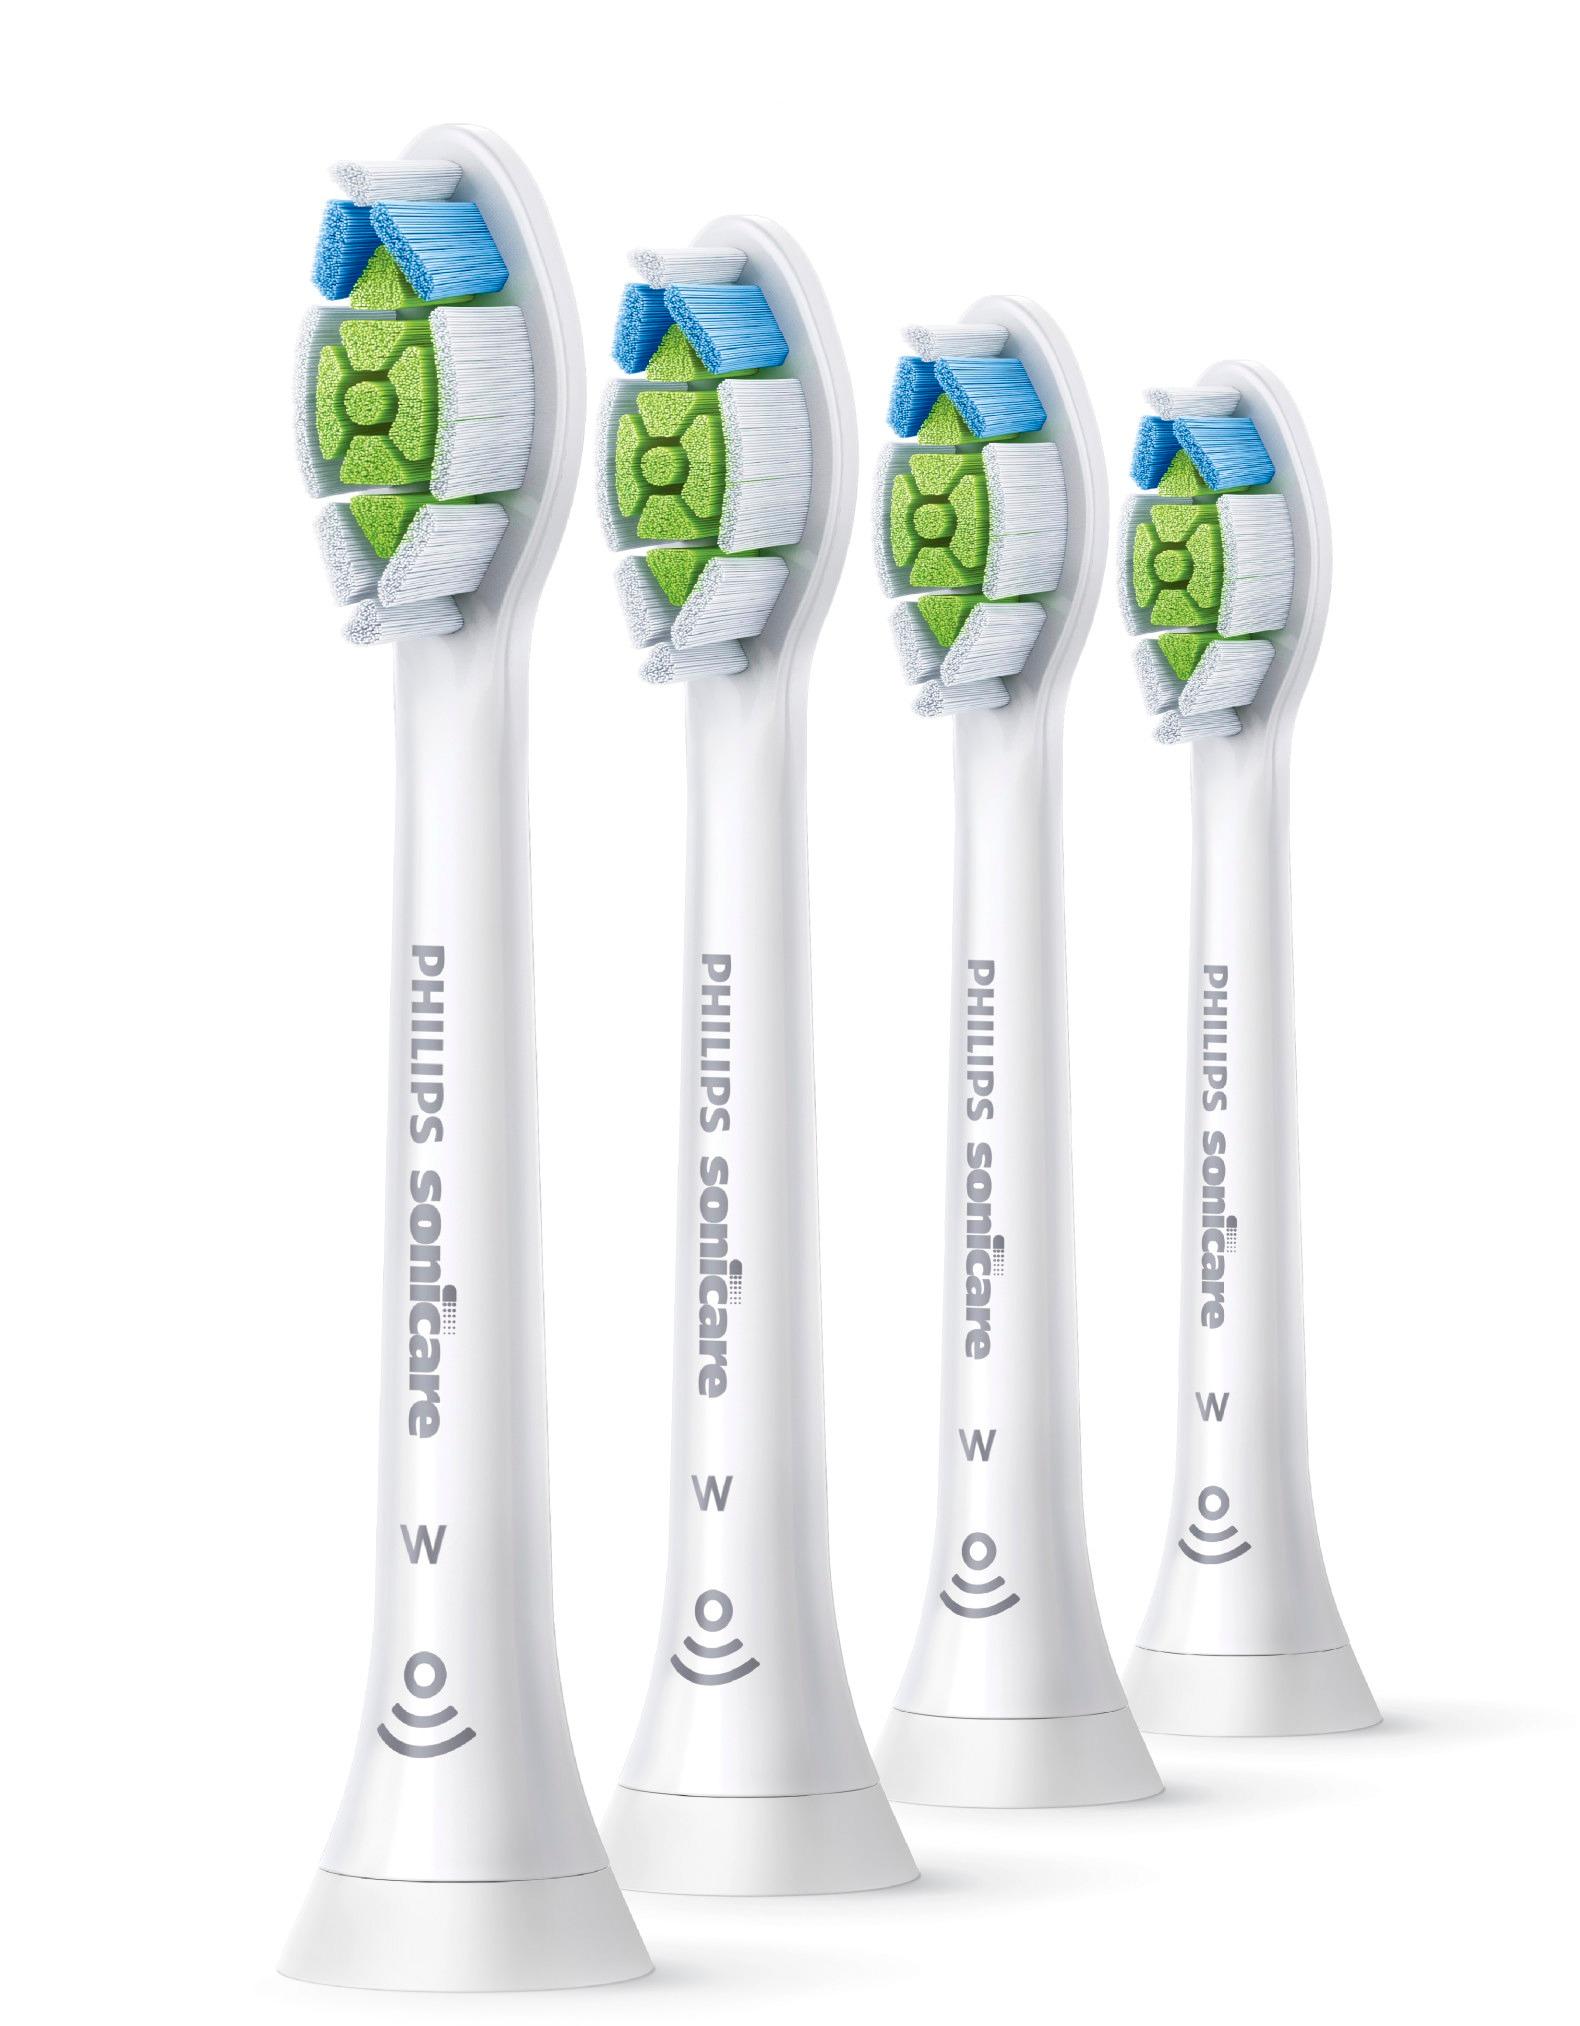 Angle View: Philips Sonicare - DiamondClean Replacement Toothbrush Heads (4-pack) - White